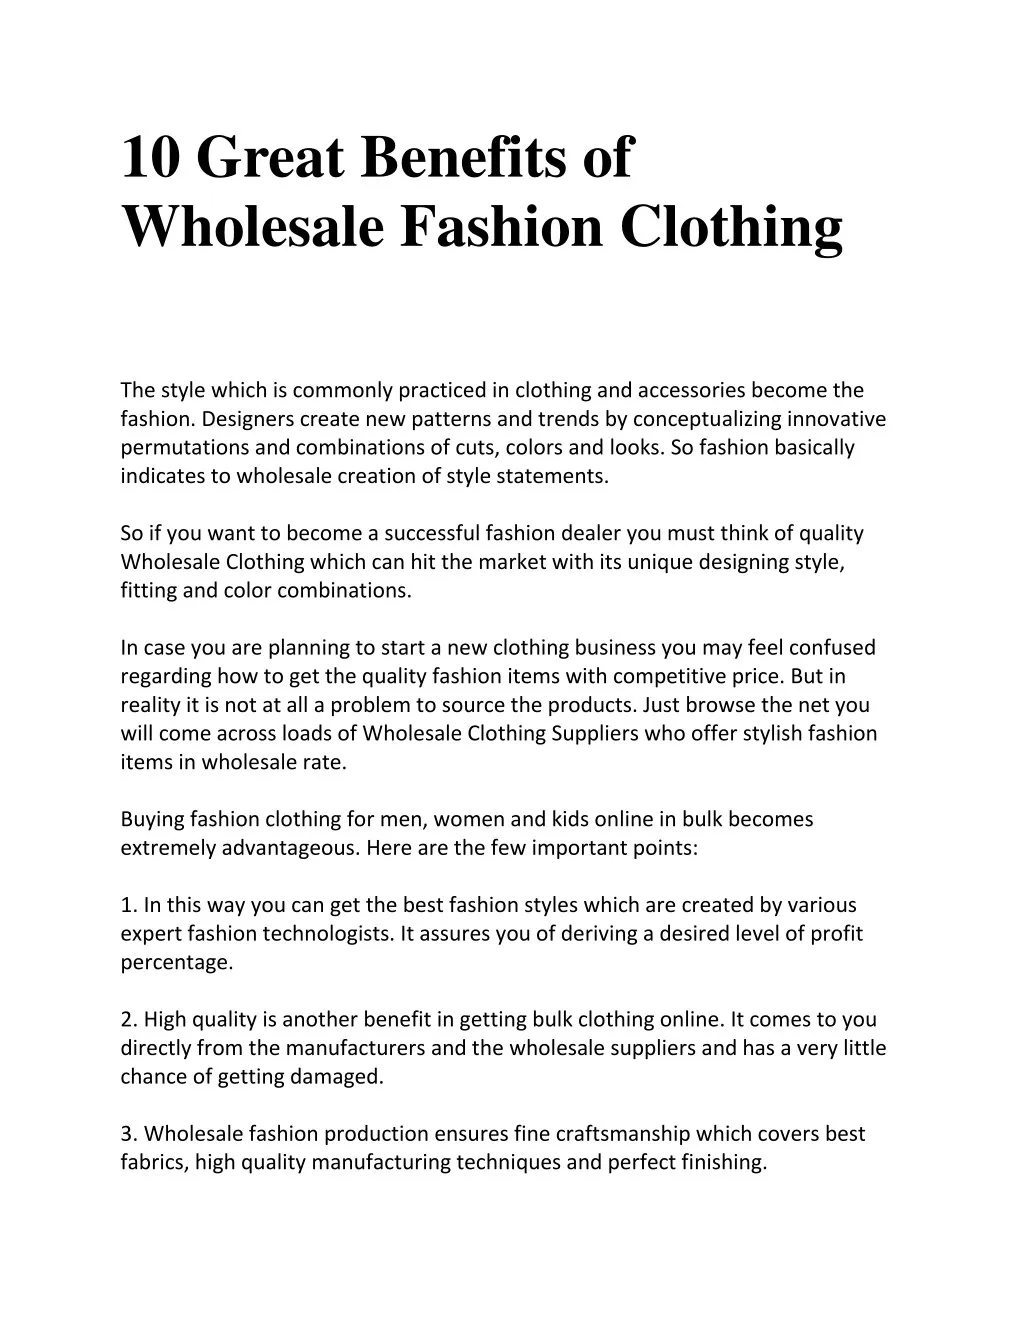 10 great benefits of wholesale fashion clothing n.